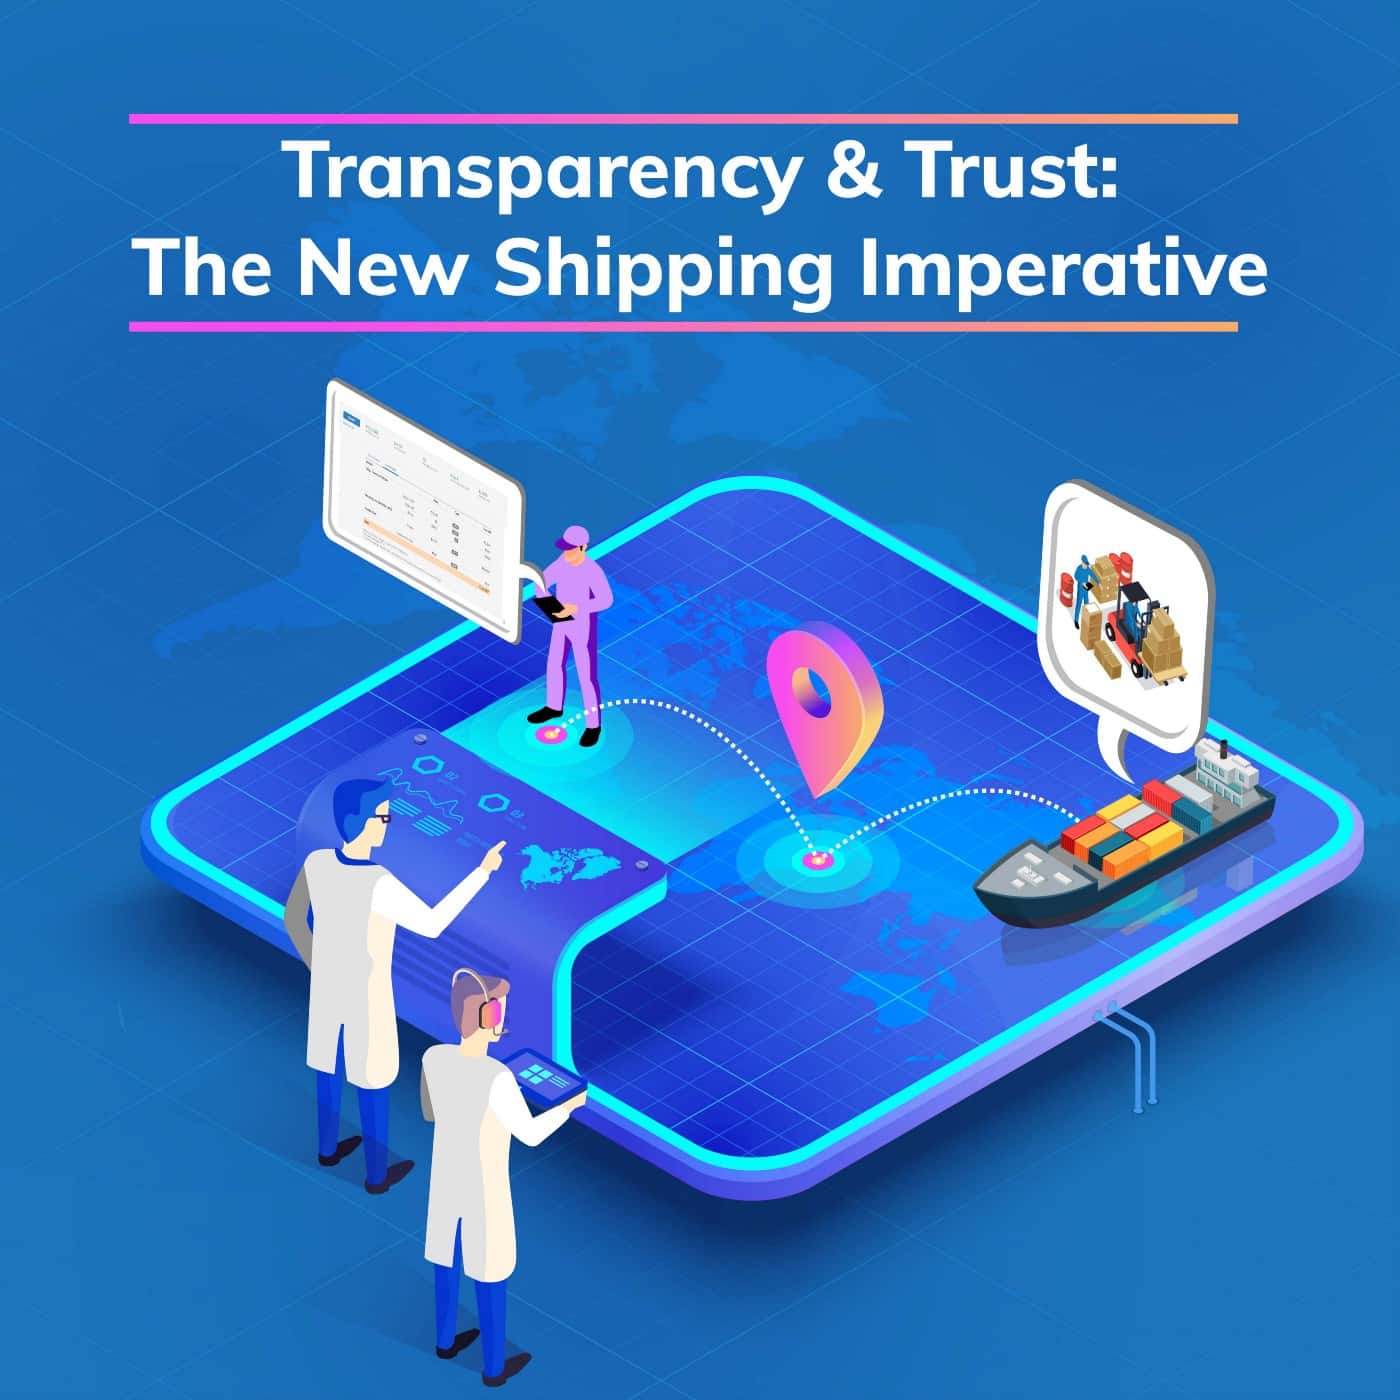 Transparency and Trust in International Shipping